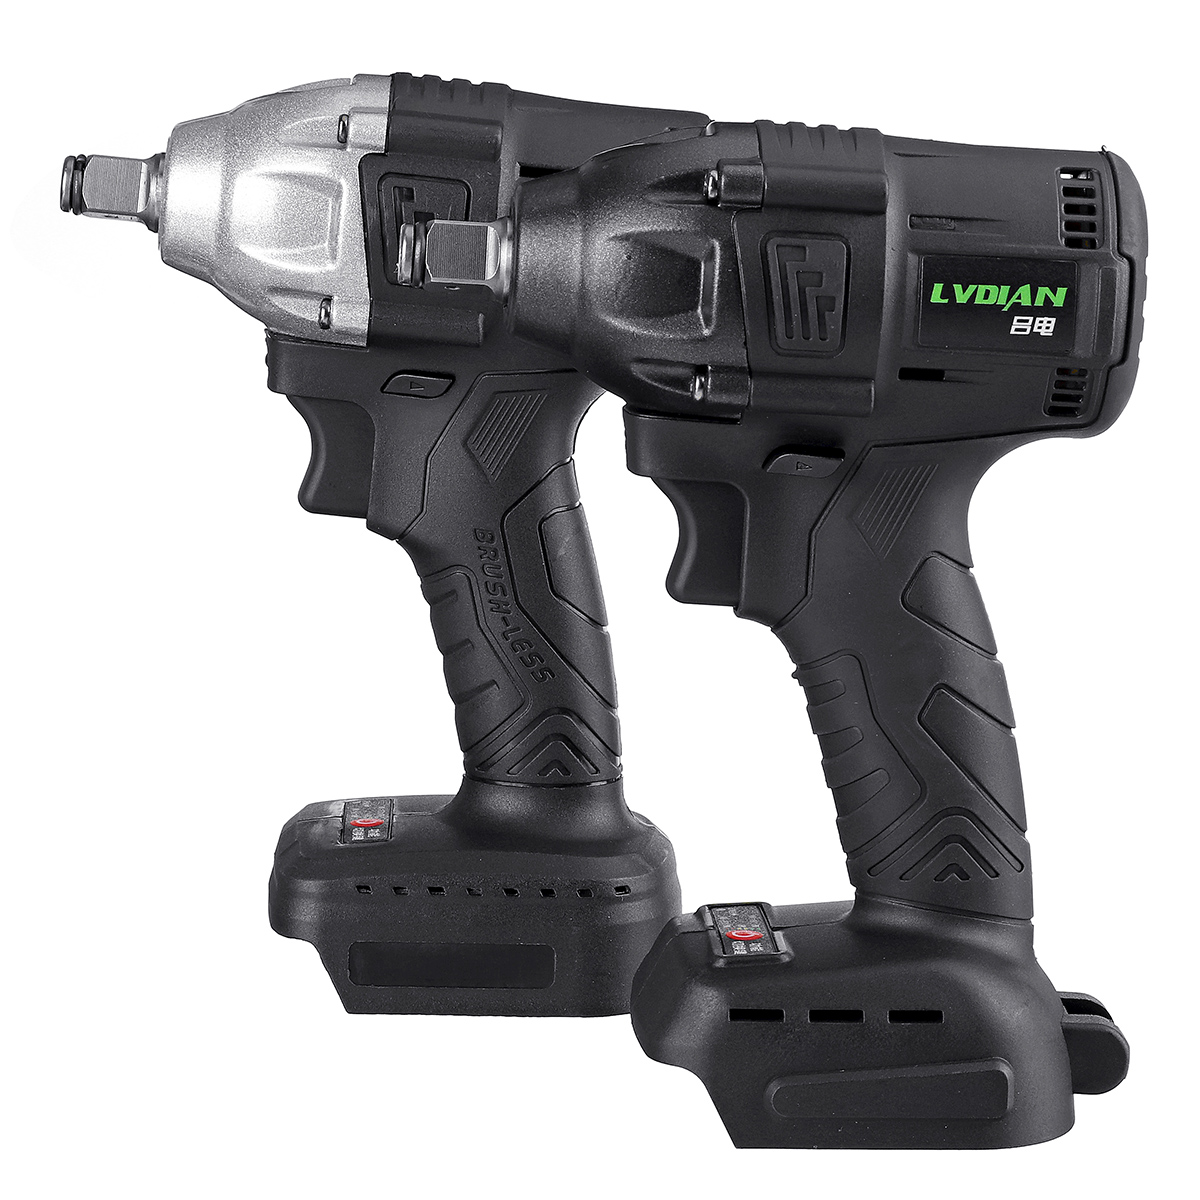 Cordless-Brushless-Electric-Impact-Wrench-For-18V-Makita-Battery-1685910-6